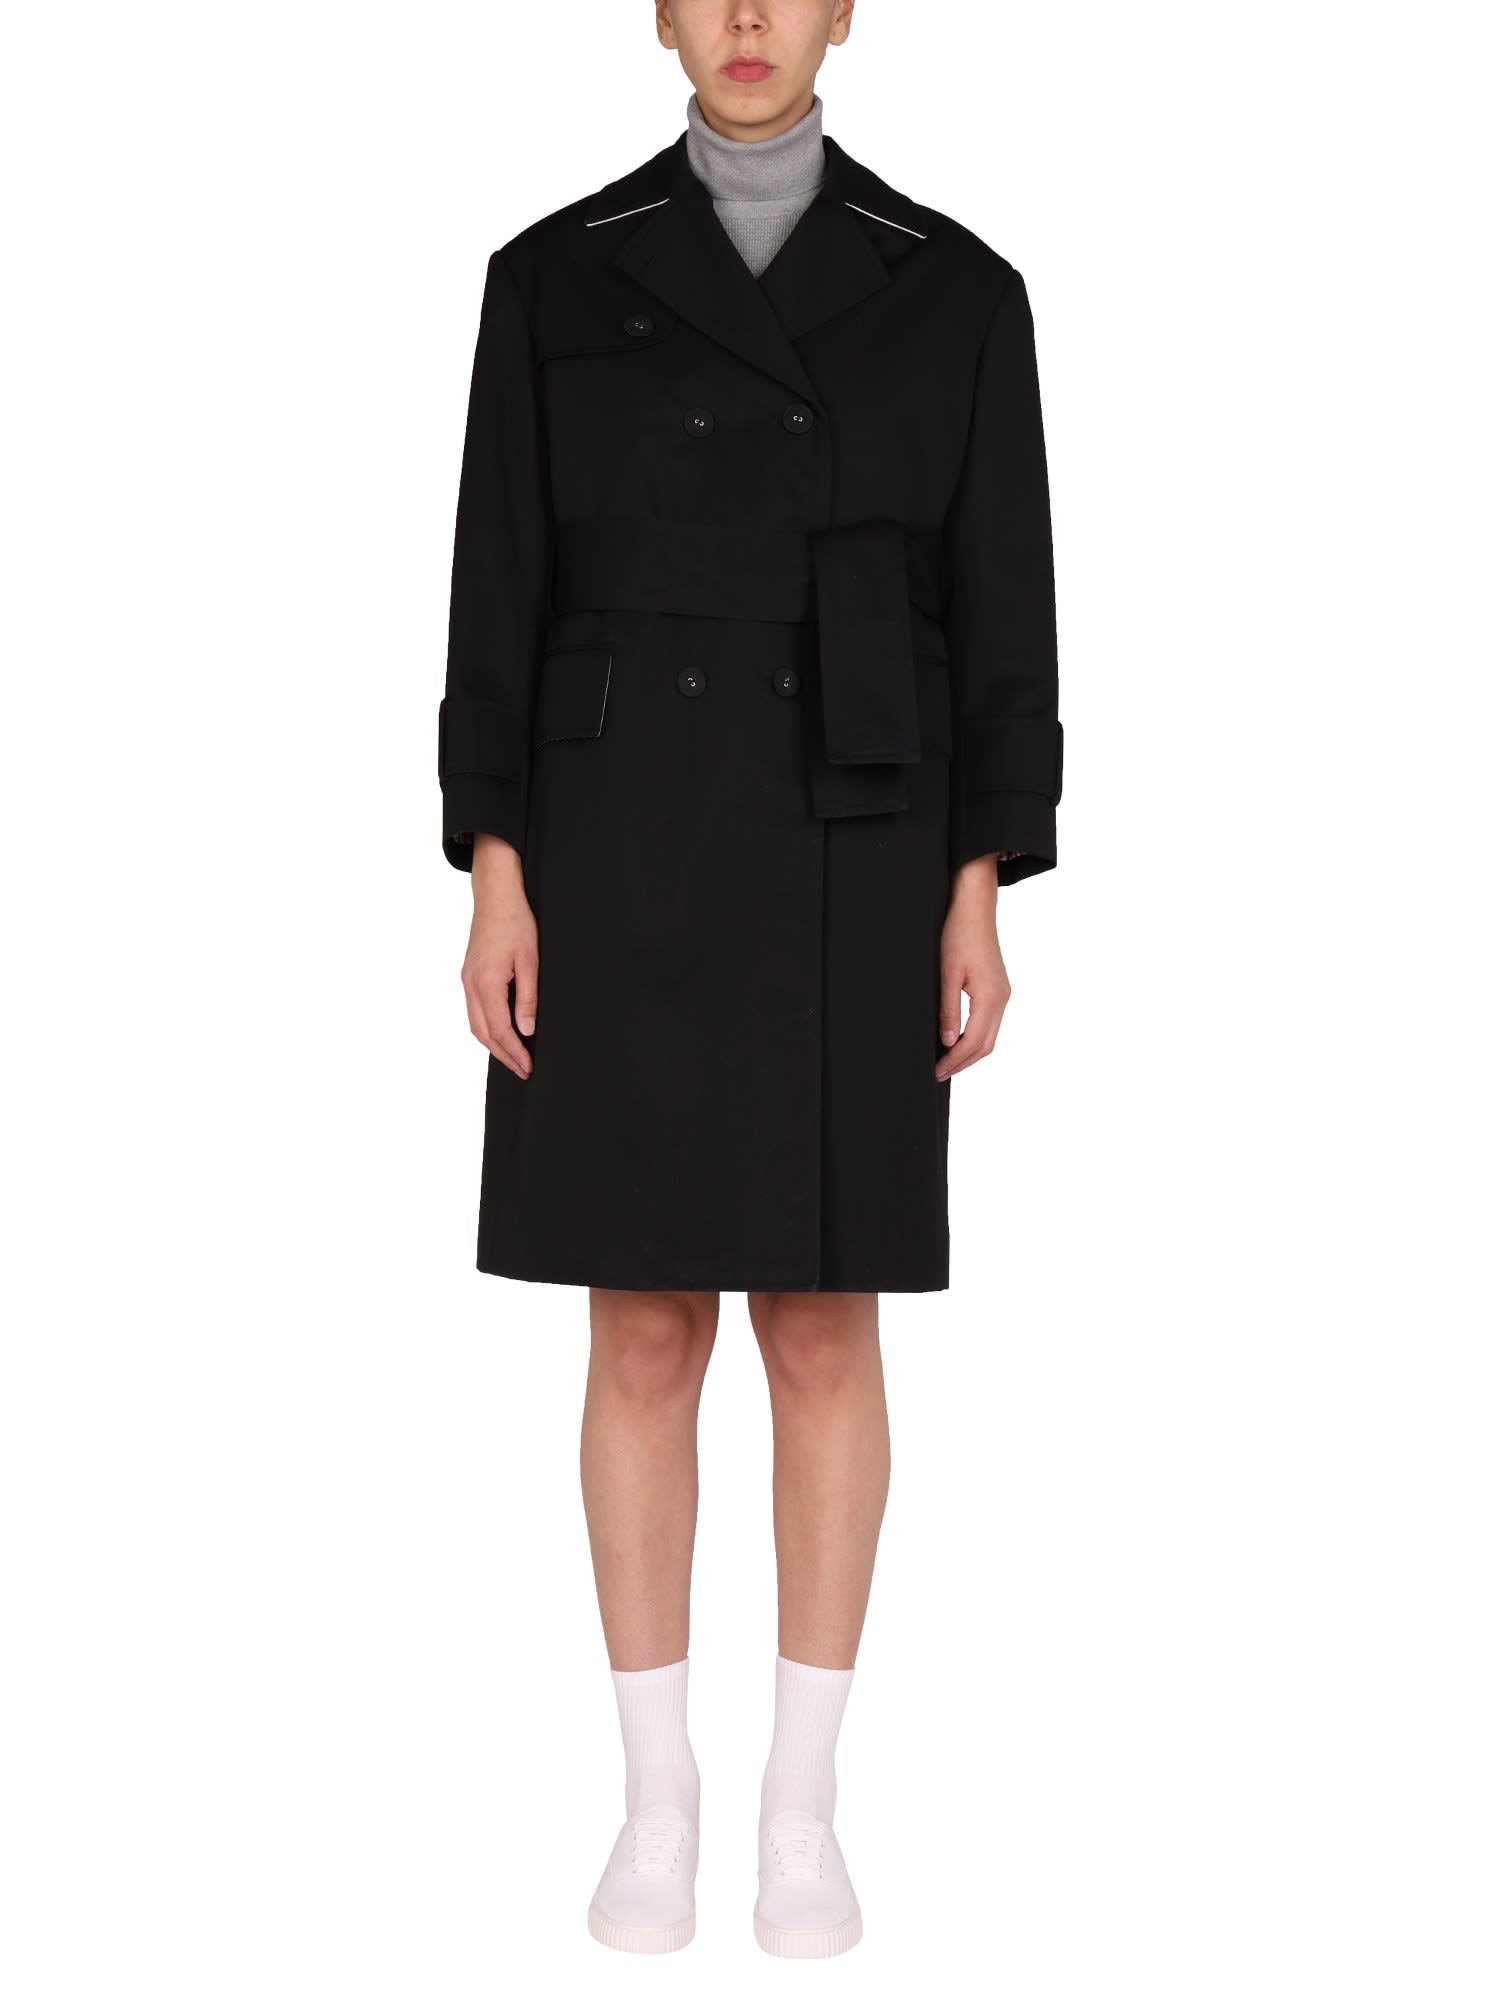 THOM BROWNE DOUBLE-BREASTED TRENCH COAT